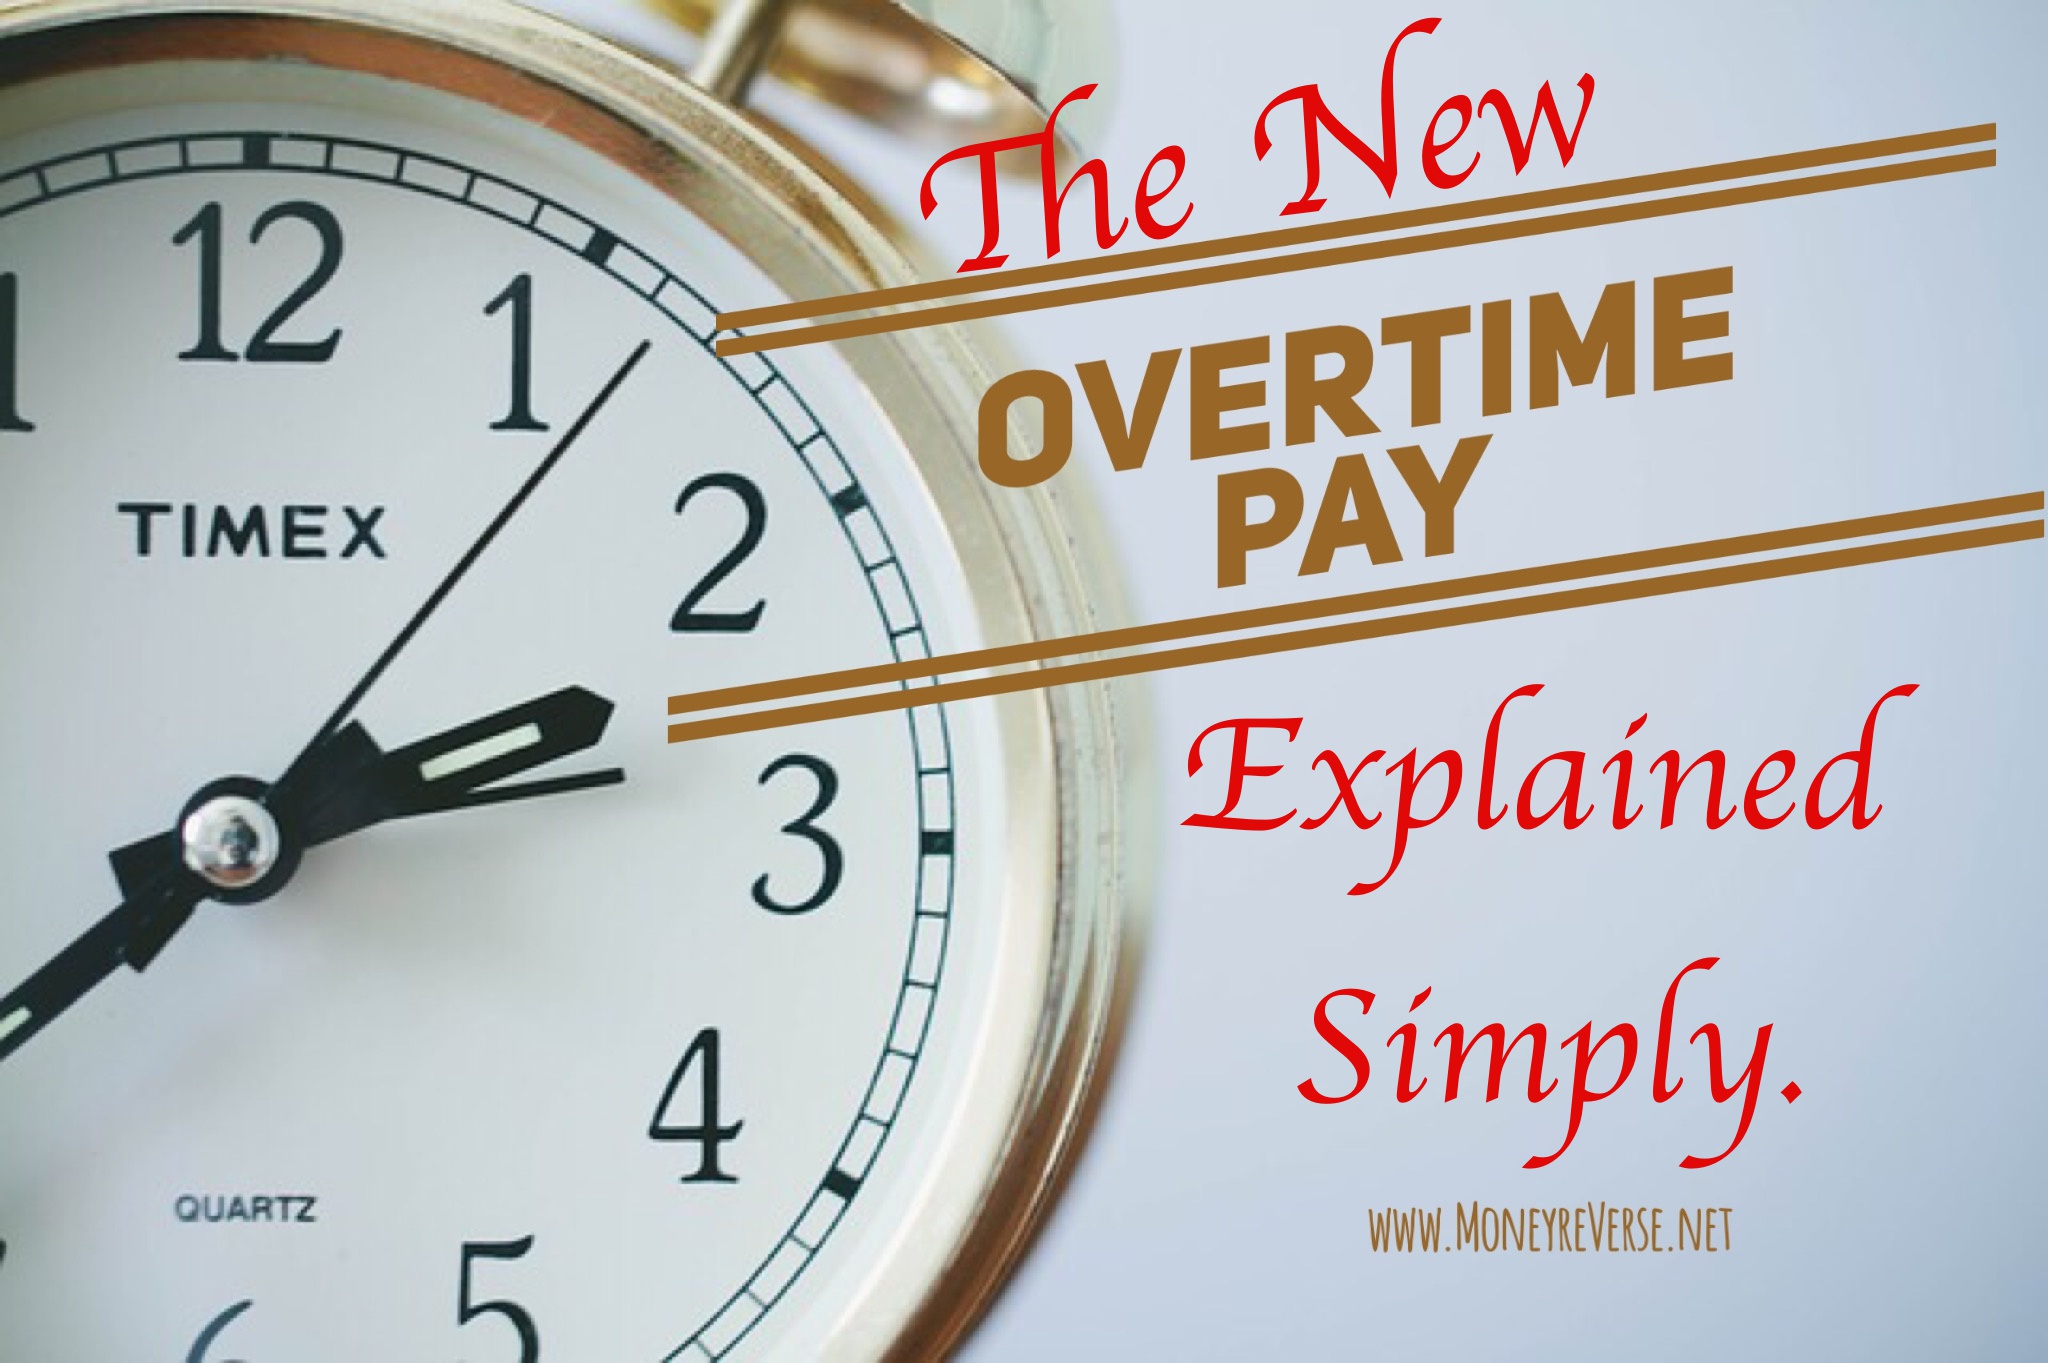 Money reVerse Overtime Pay Explained Simply